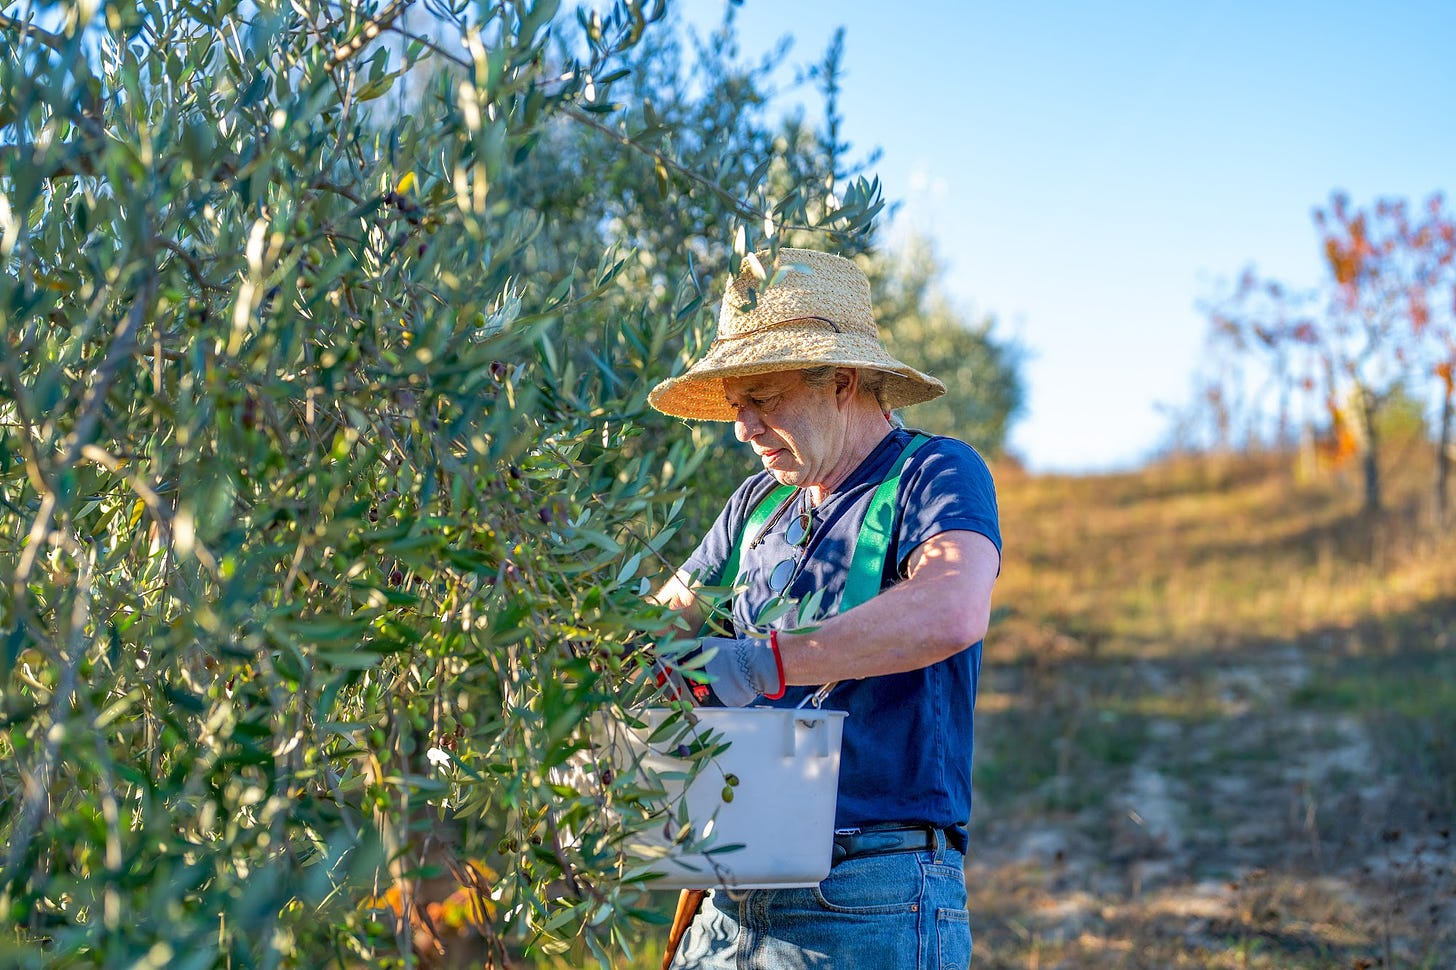 Stephen picking olives in the orchard.